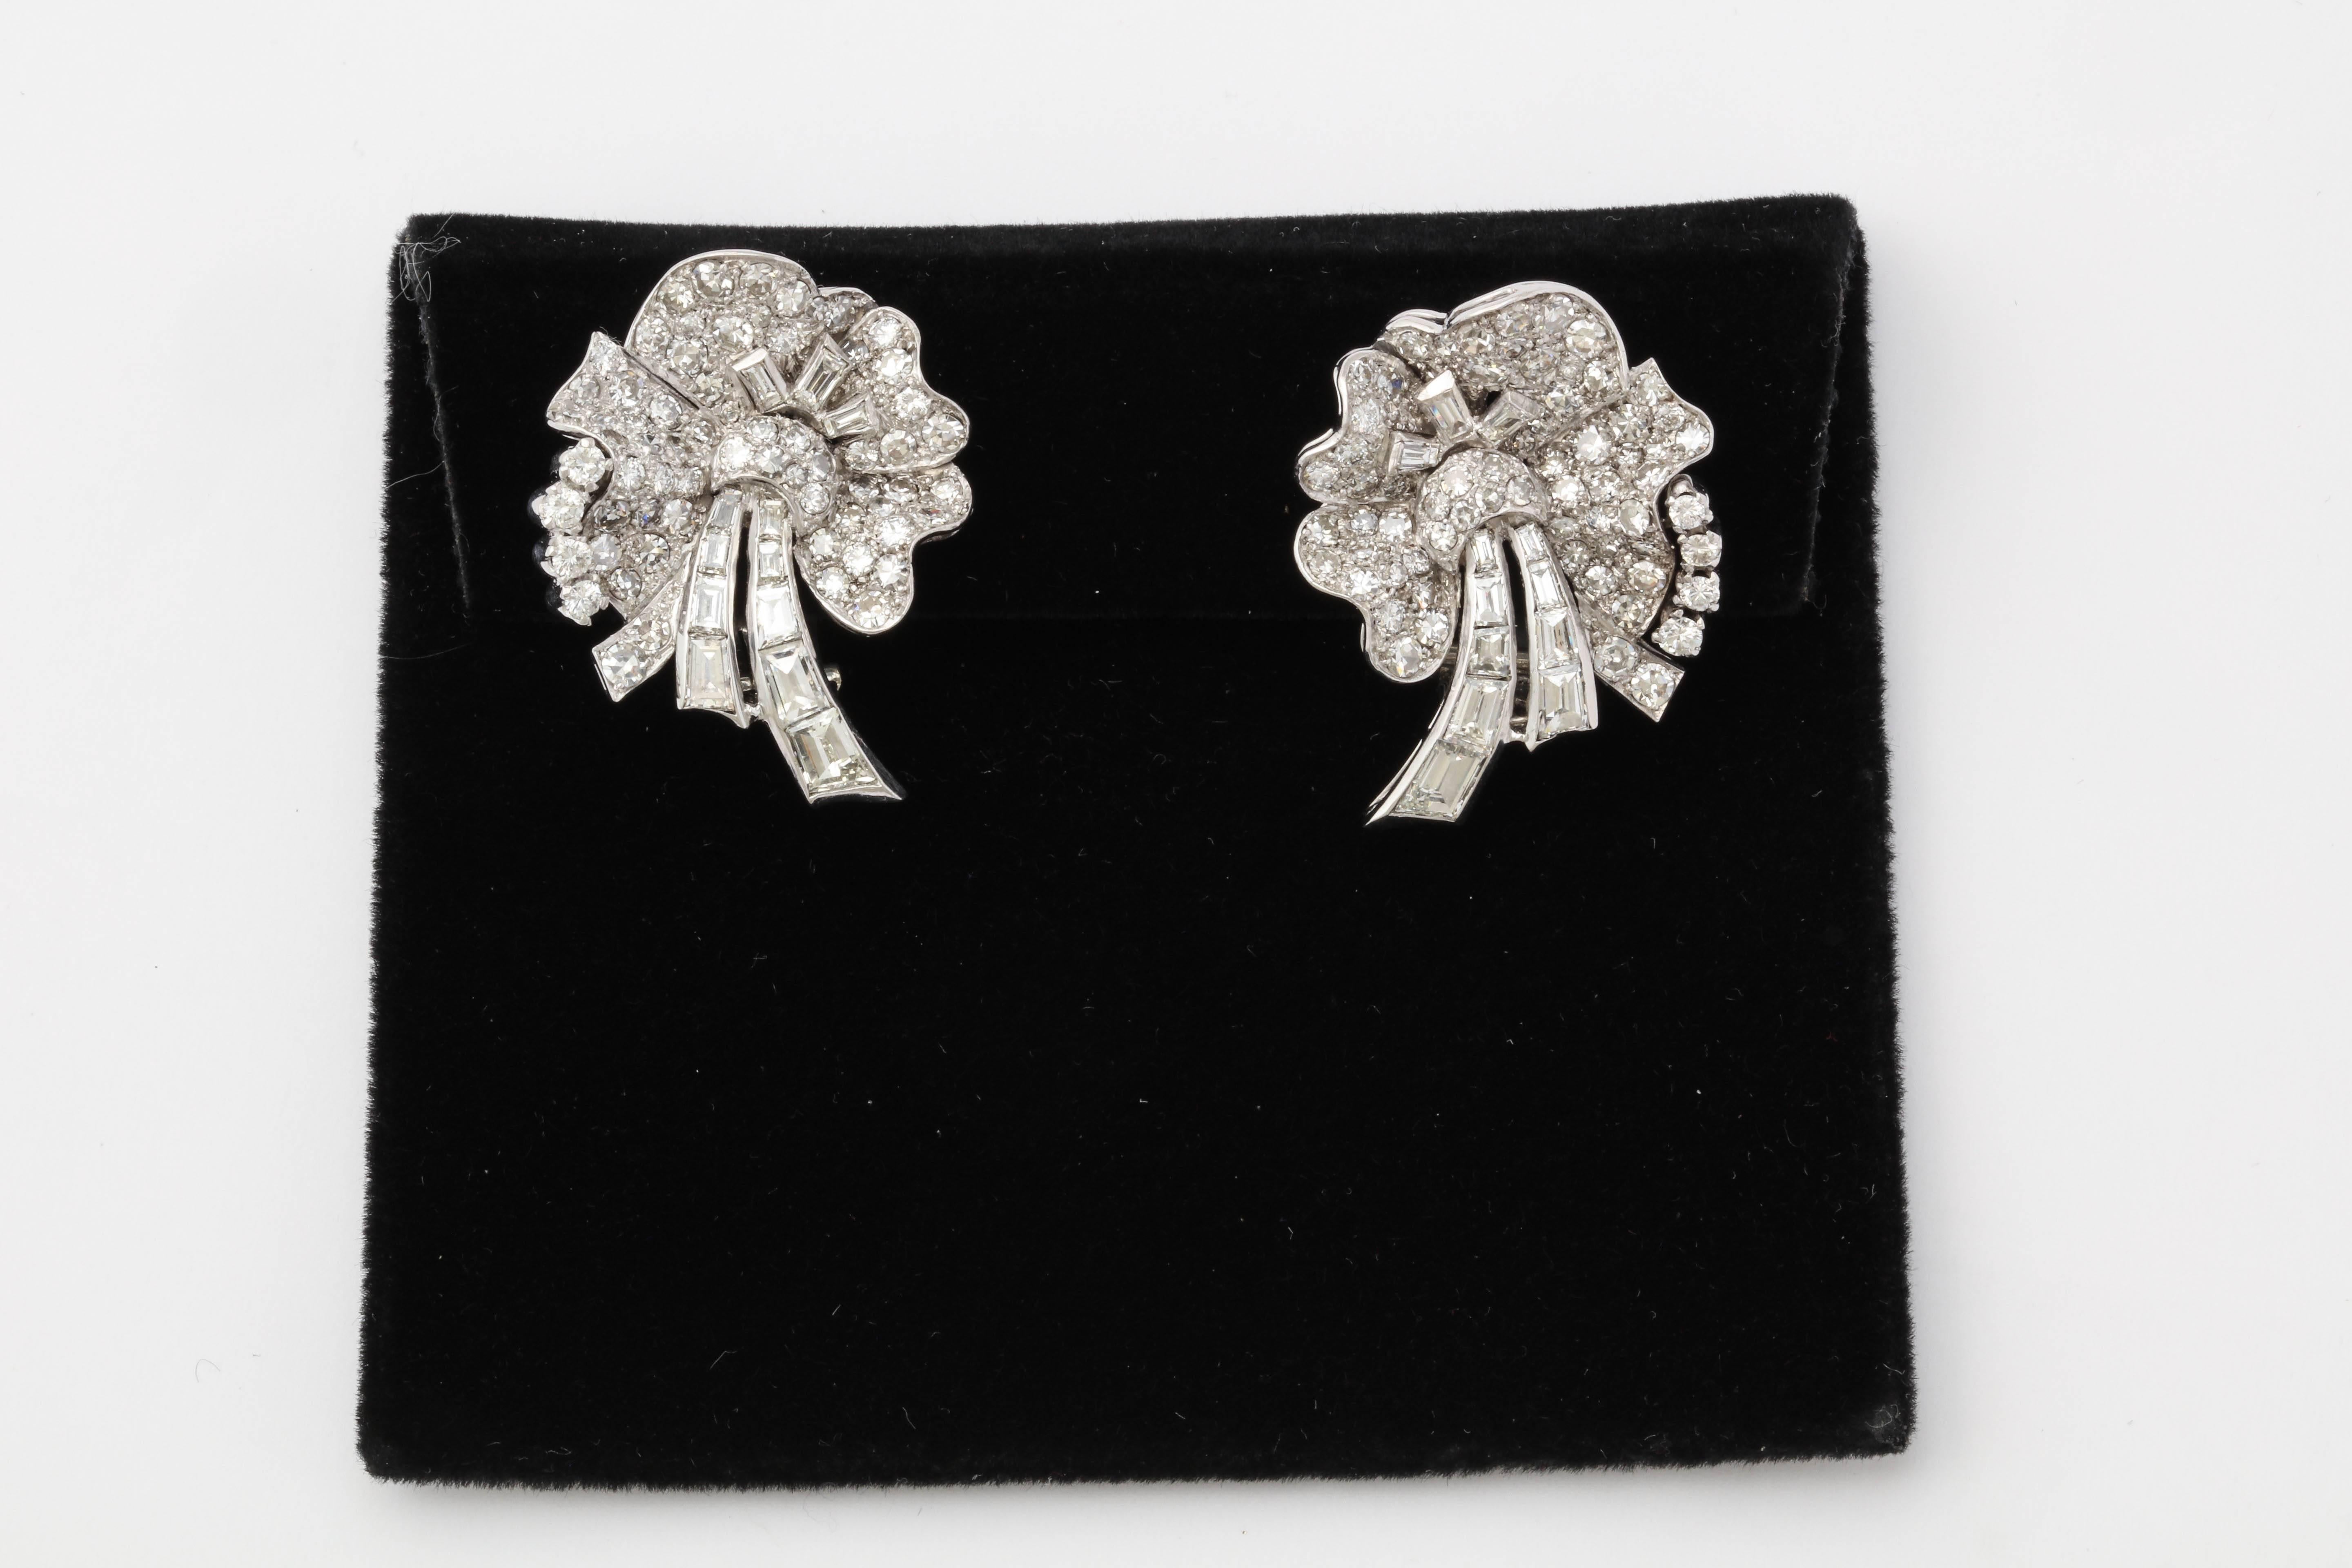 One Pair Of Ladies Platinum Earrings Embellished With Numerous round Cut Diamonds weighing Approximately 3.75 Cts. Pansy Flower earrings further Designed with 24 Baguettes weighing Approximately 1.25 Cts. Total weight Of diamonds approximately 